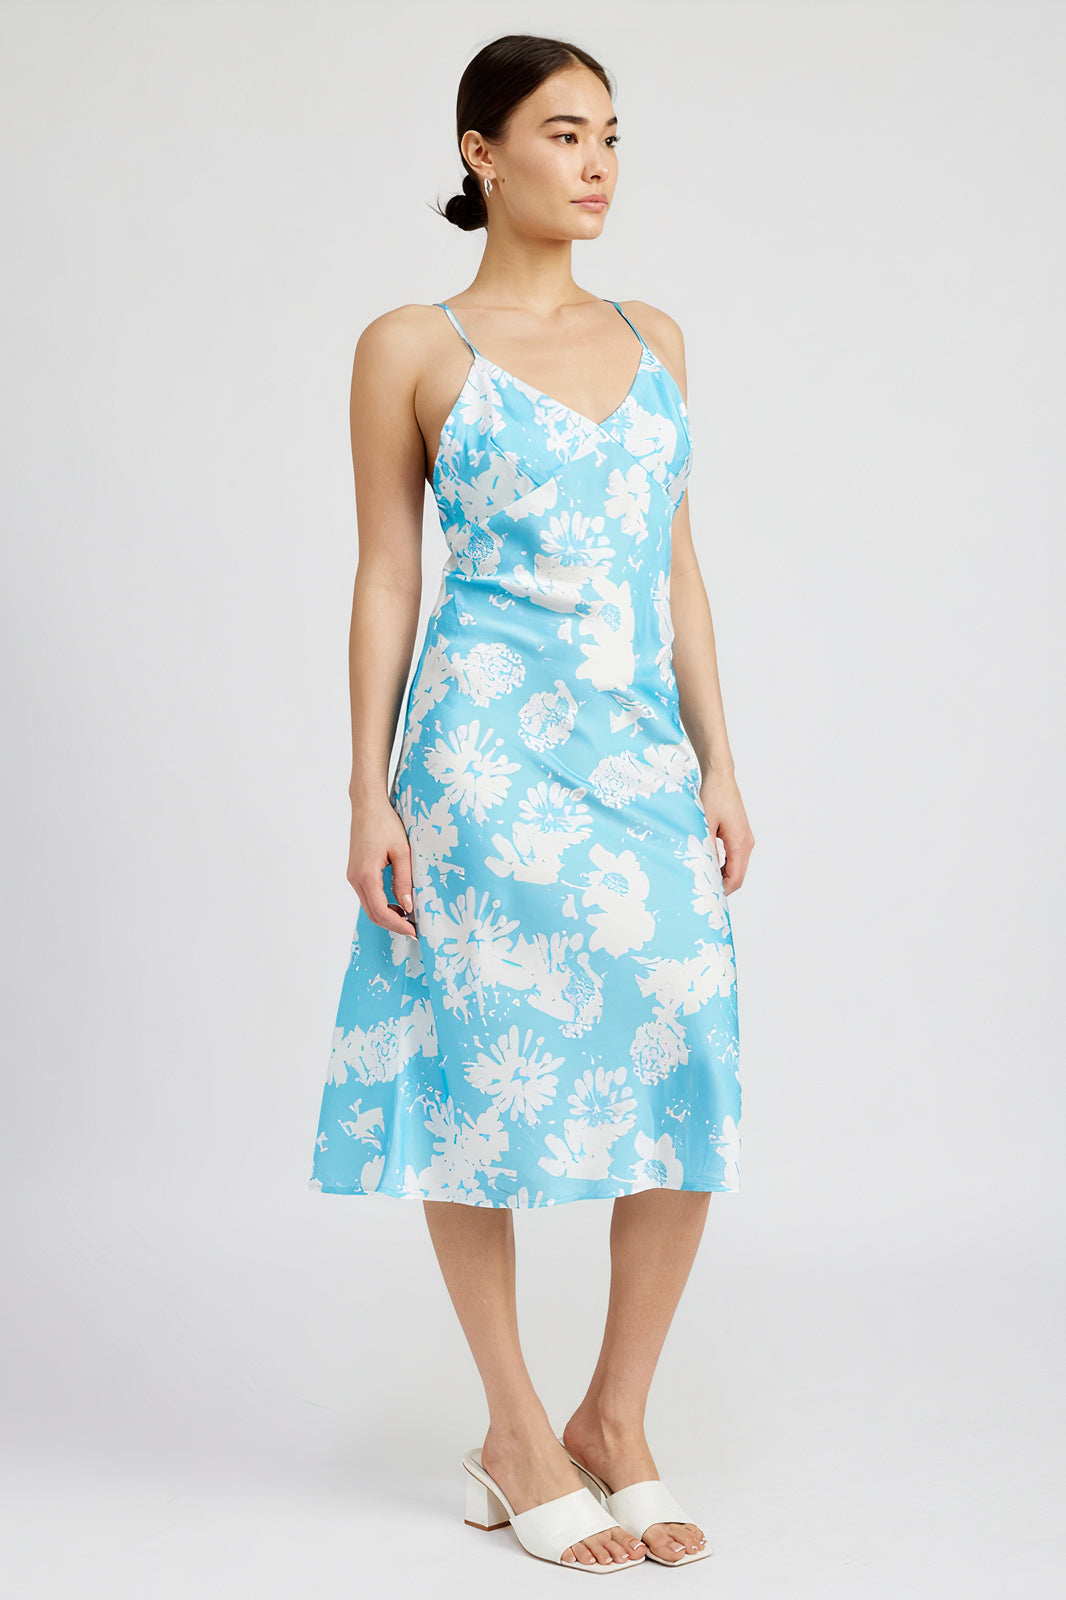 Forget-Me-Not Open Back Dress